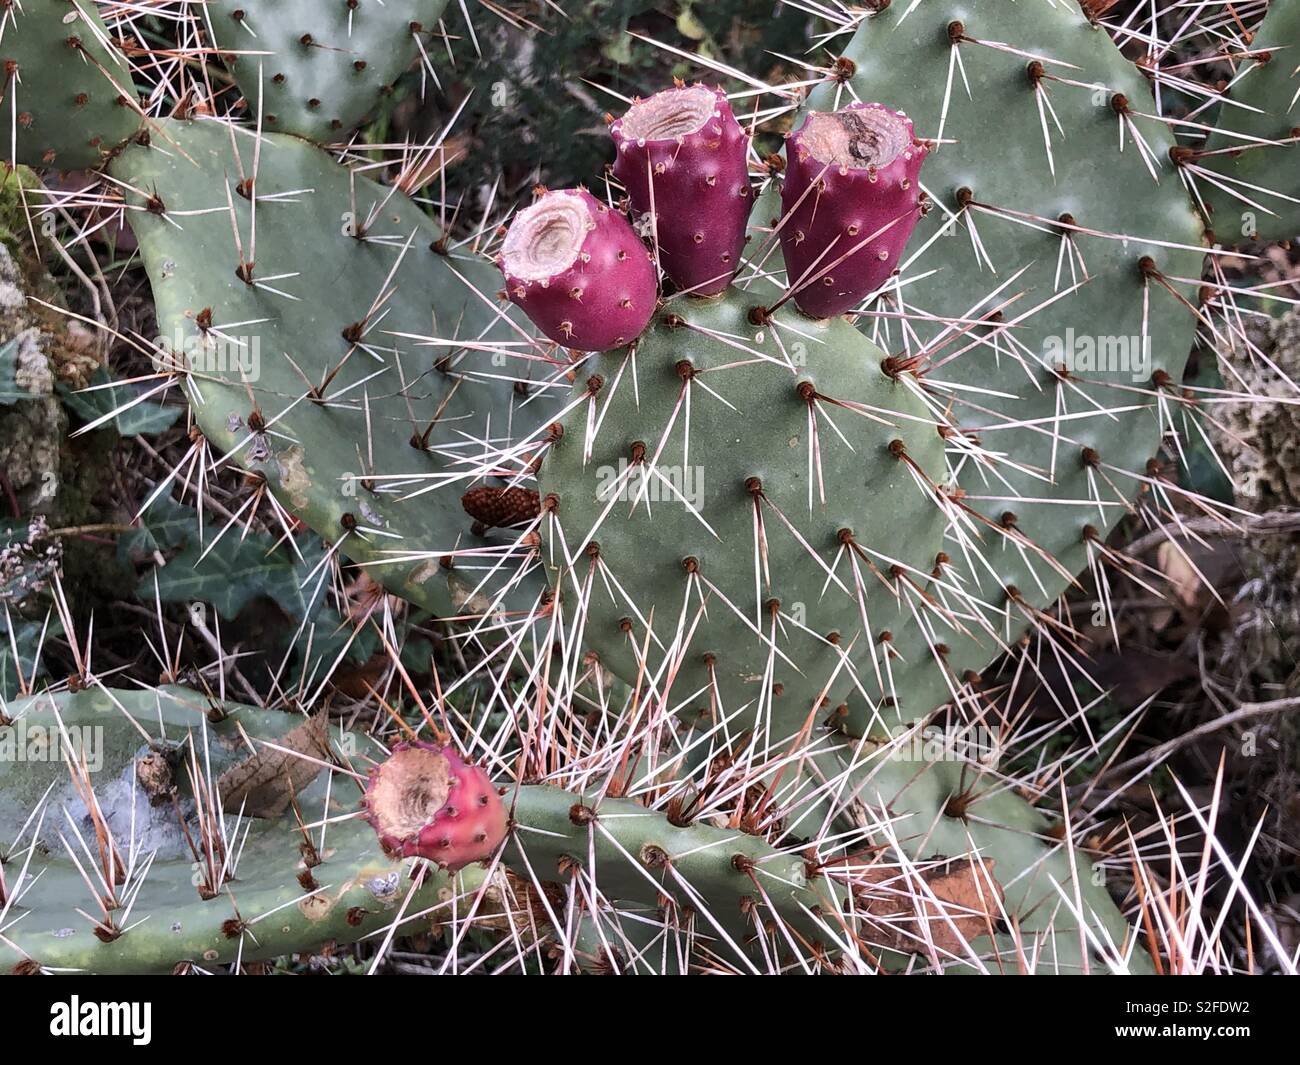 Prickly pears detail view Stock Photo